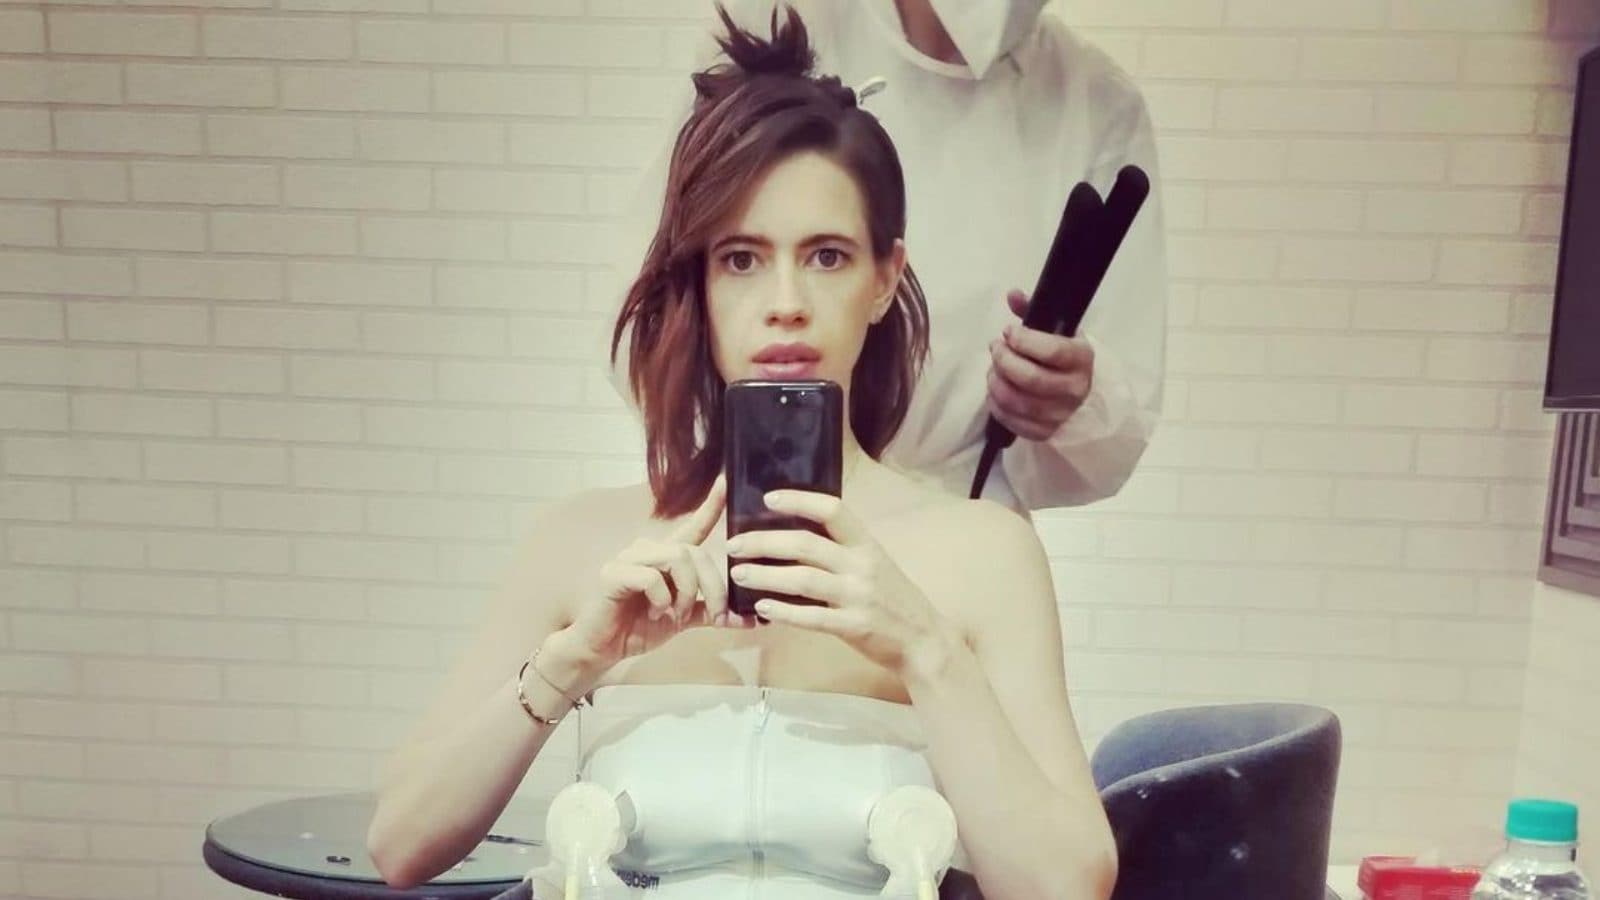 Kalki Koechlin Poses With Breast Pumps As She Preps for Shoot: ‘In Memory of Mom’s Guilt, Raging Boobs’